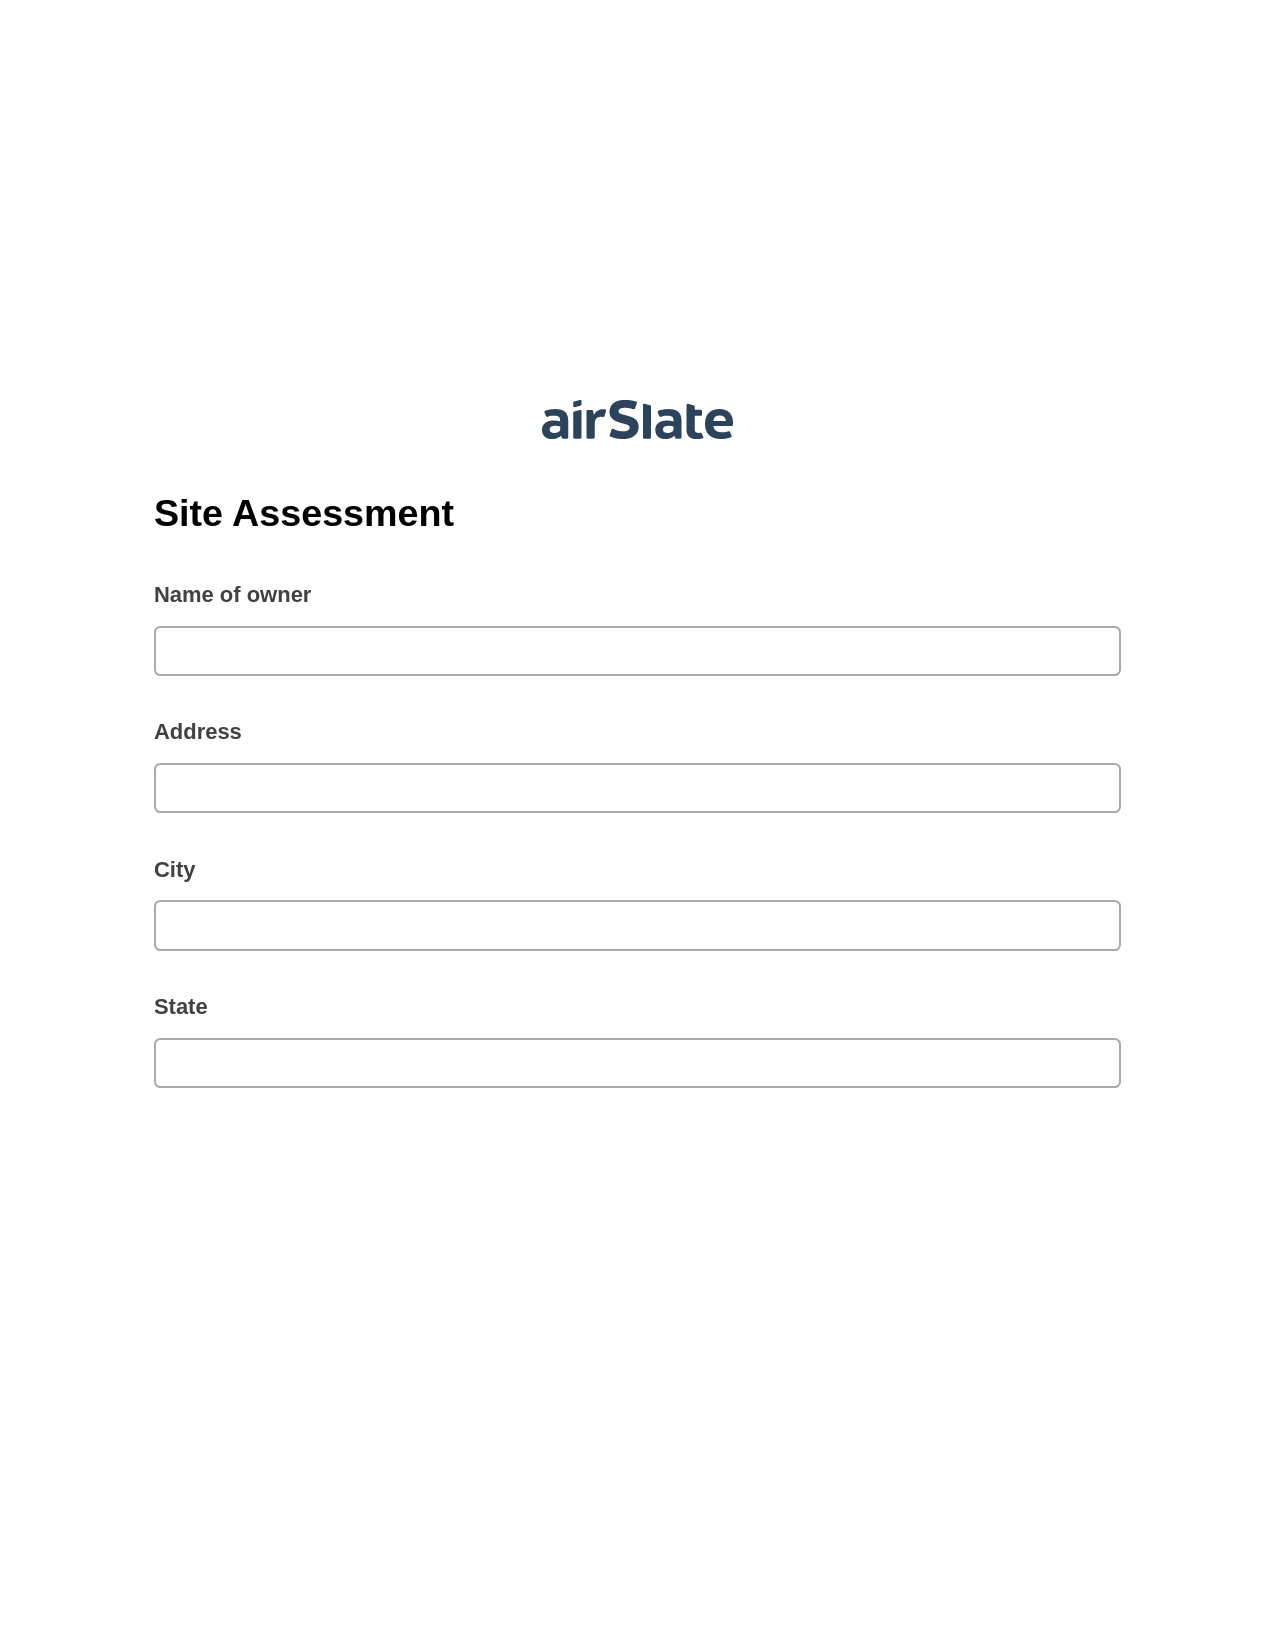 Multirole Site Assessment Pre-fill from CSV File Bot, Send a Slate with Roles Bot, Export to Salesforce Bot